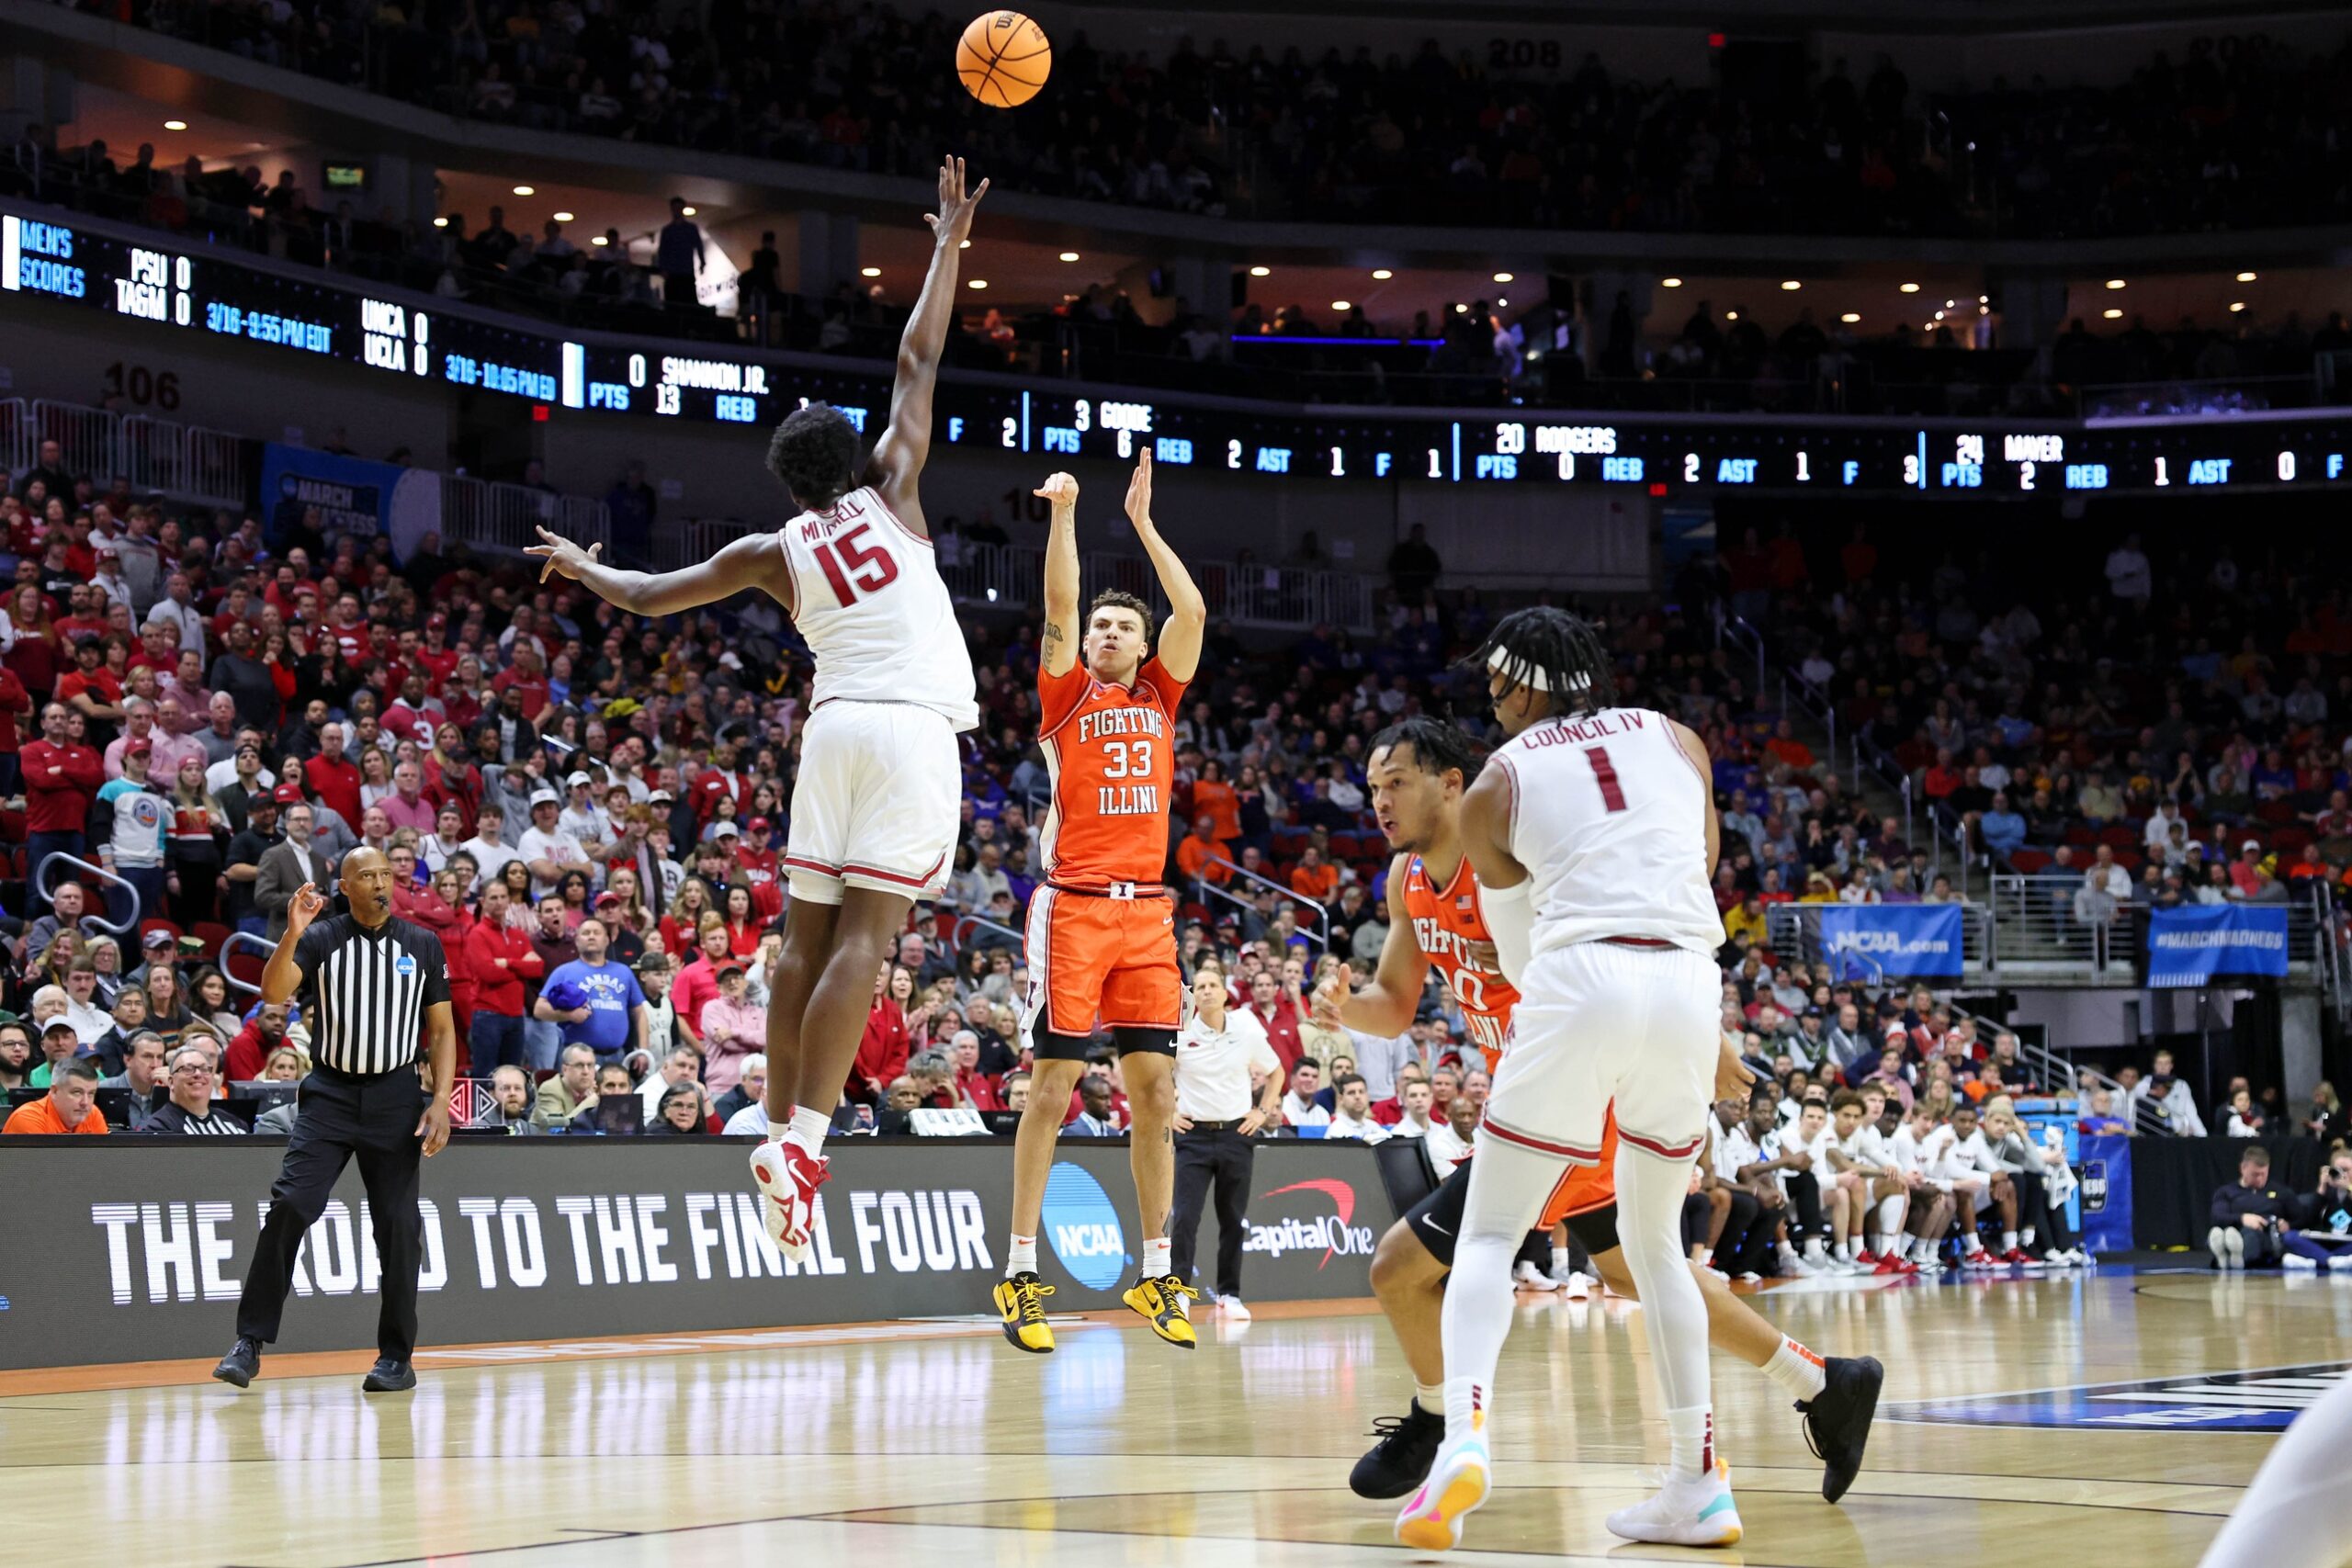 Mar 16, 2023; Des Moines, IA, USA; Illinois Fighting Illini forward Coleman Hawkins (33) shoots the ball against Arkansas Razorbacks forward Makhi Mitchell (15) during the first half at Wells Fargo Arena. Mandatory Credit: Reese Strickland-USA TODAY Sports